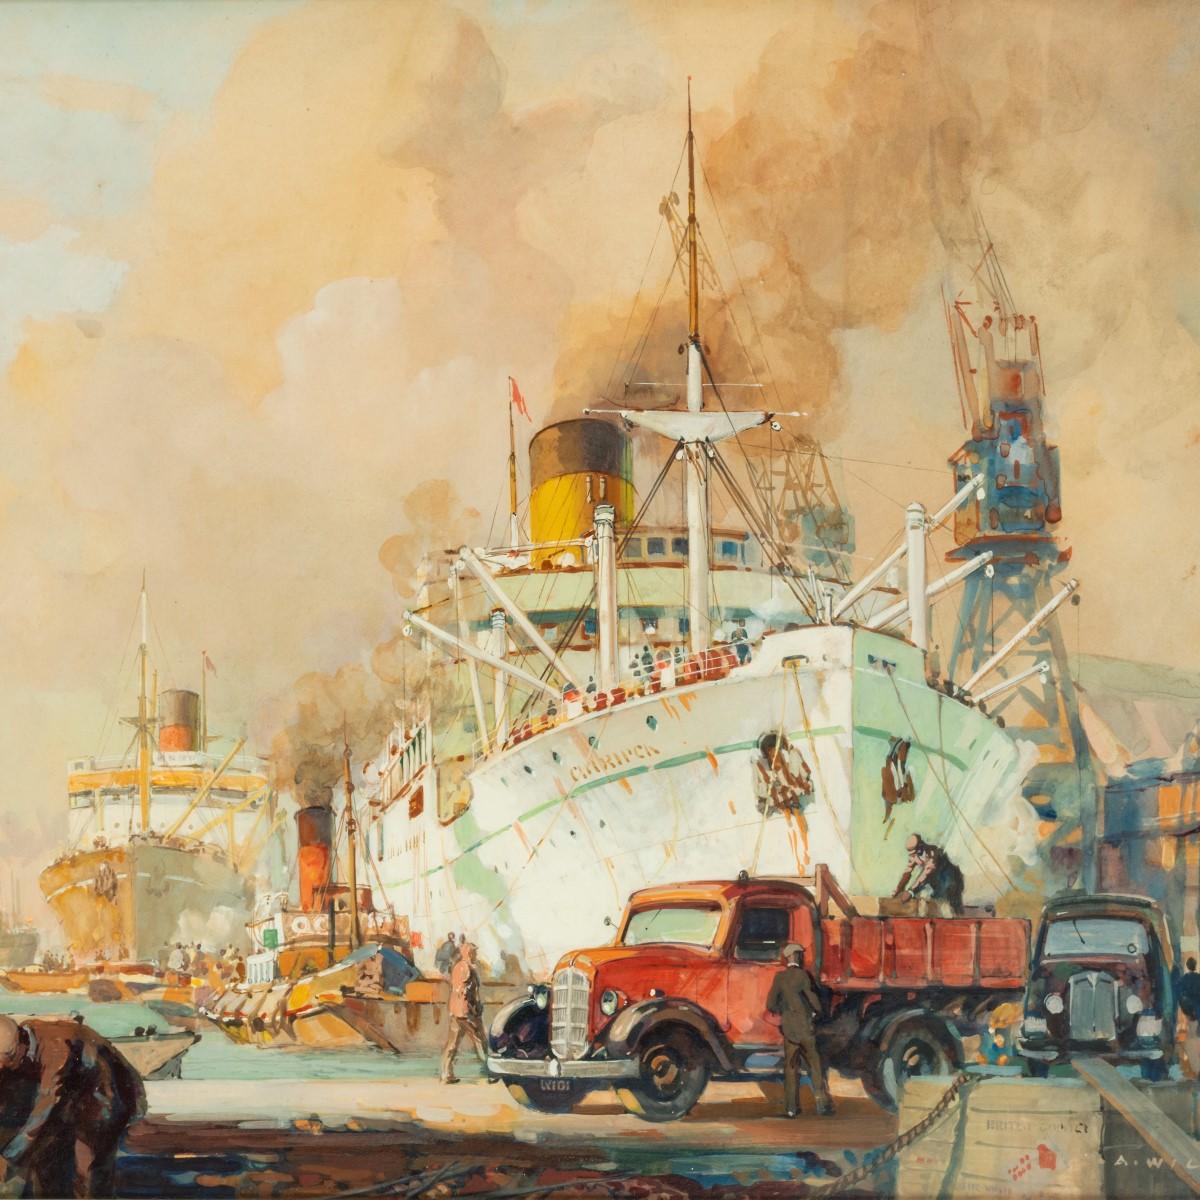 English Lesley Arthur Wilcox ‘World Commerce’ For Sale